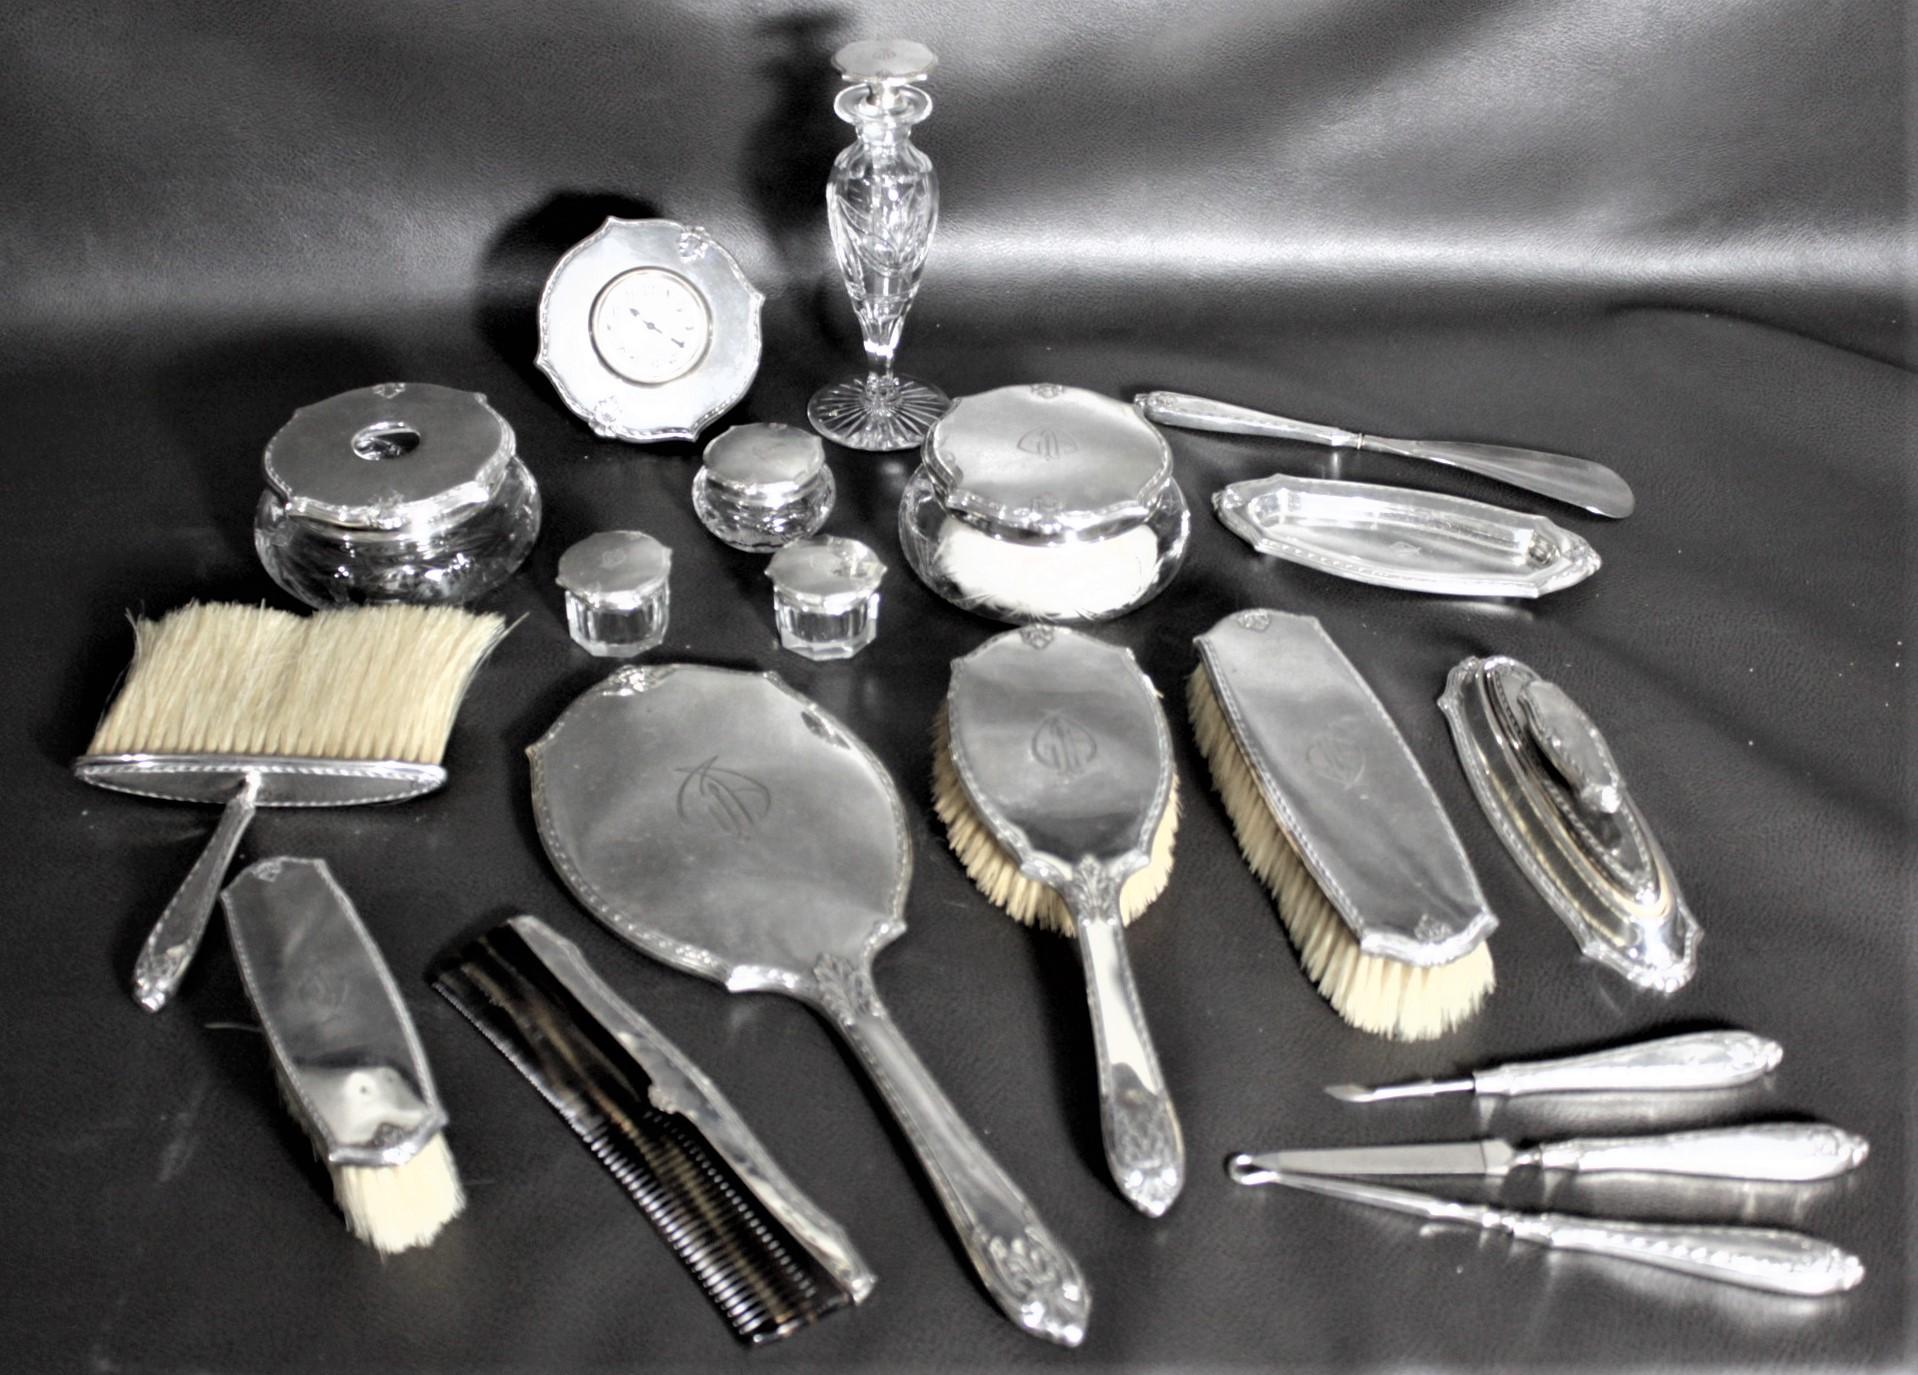 This very large sterling silver ladies dresser or vanity set was made in the United States, in approximately 1920 in the period Art Deco style. The set is composed of at least nineteen pieces, more if every single piece is counted, and includes the